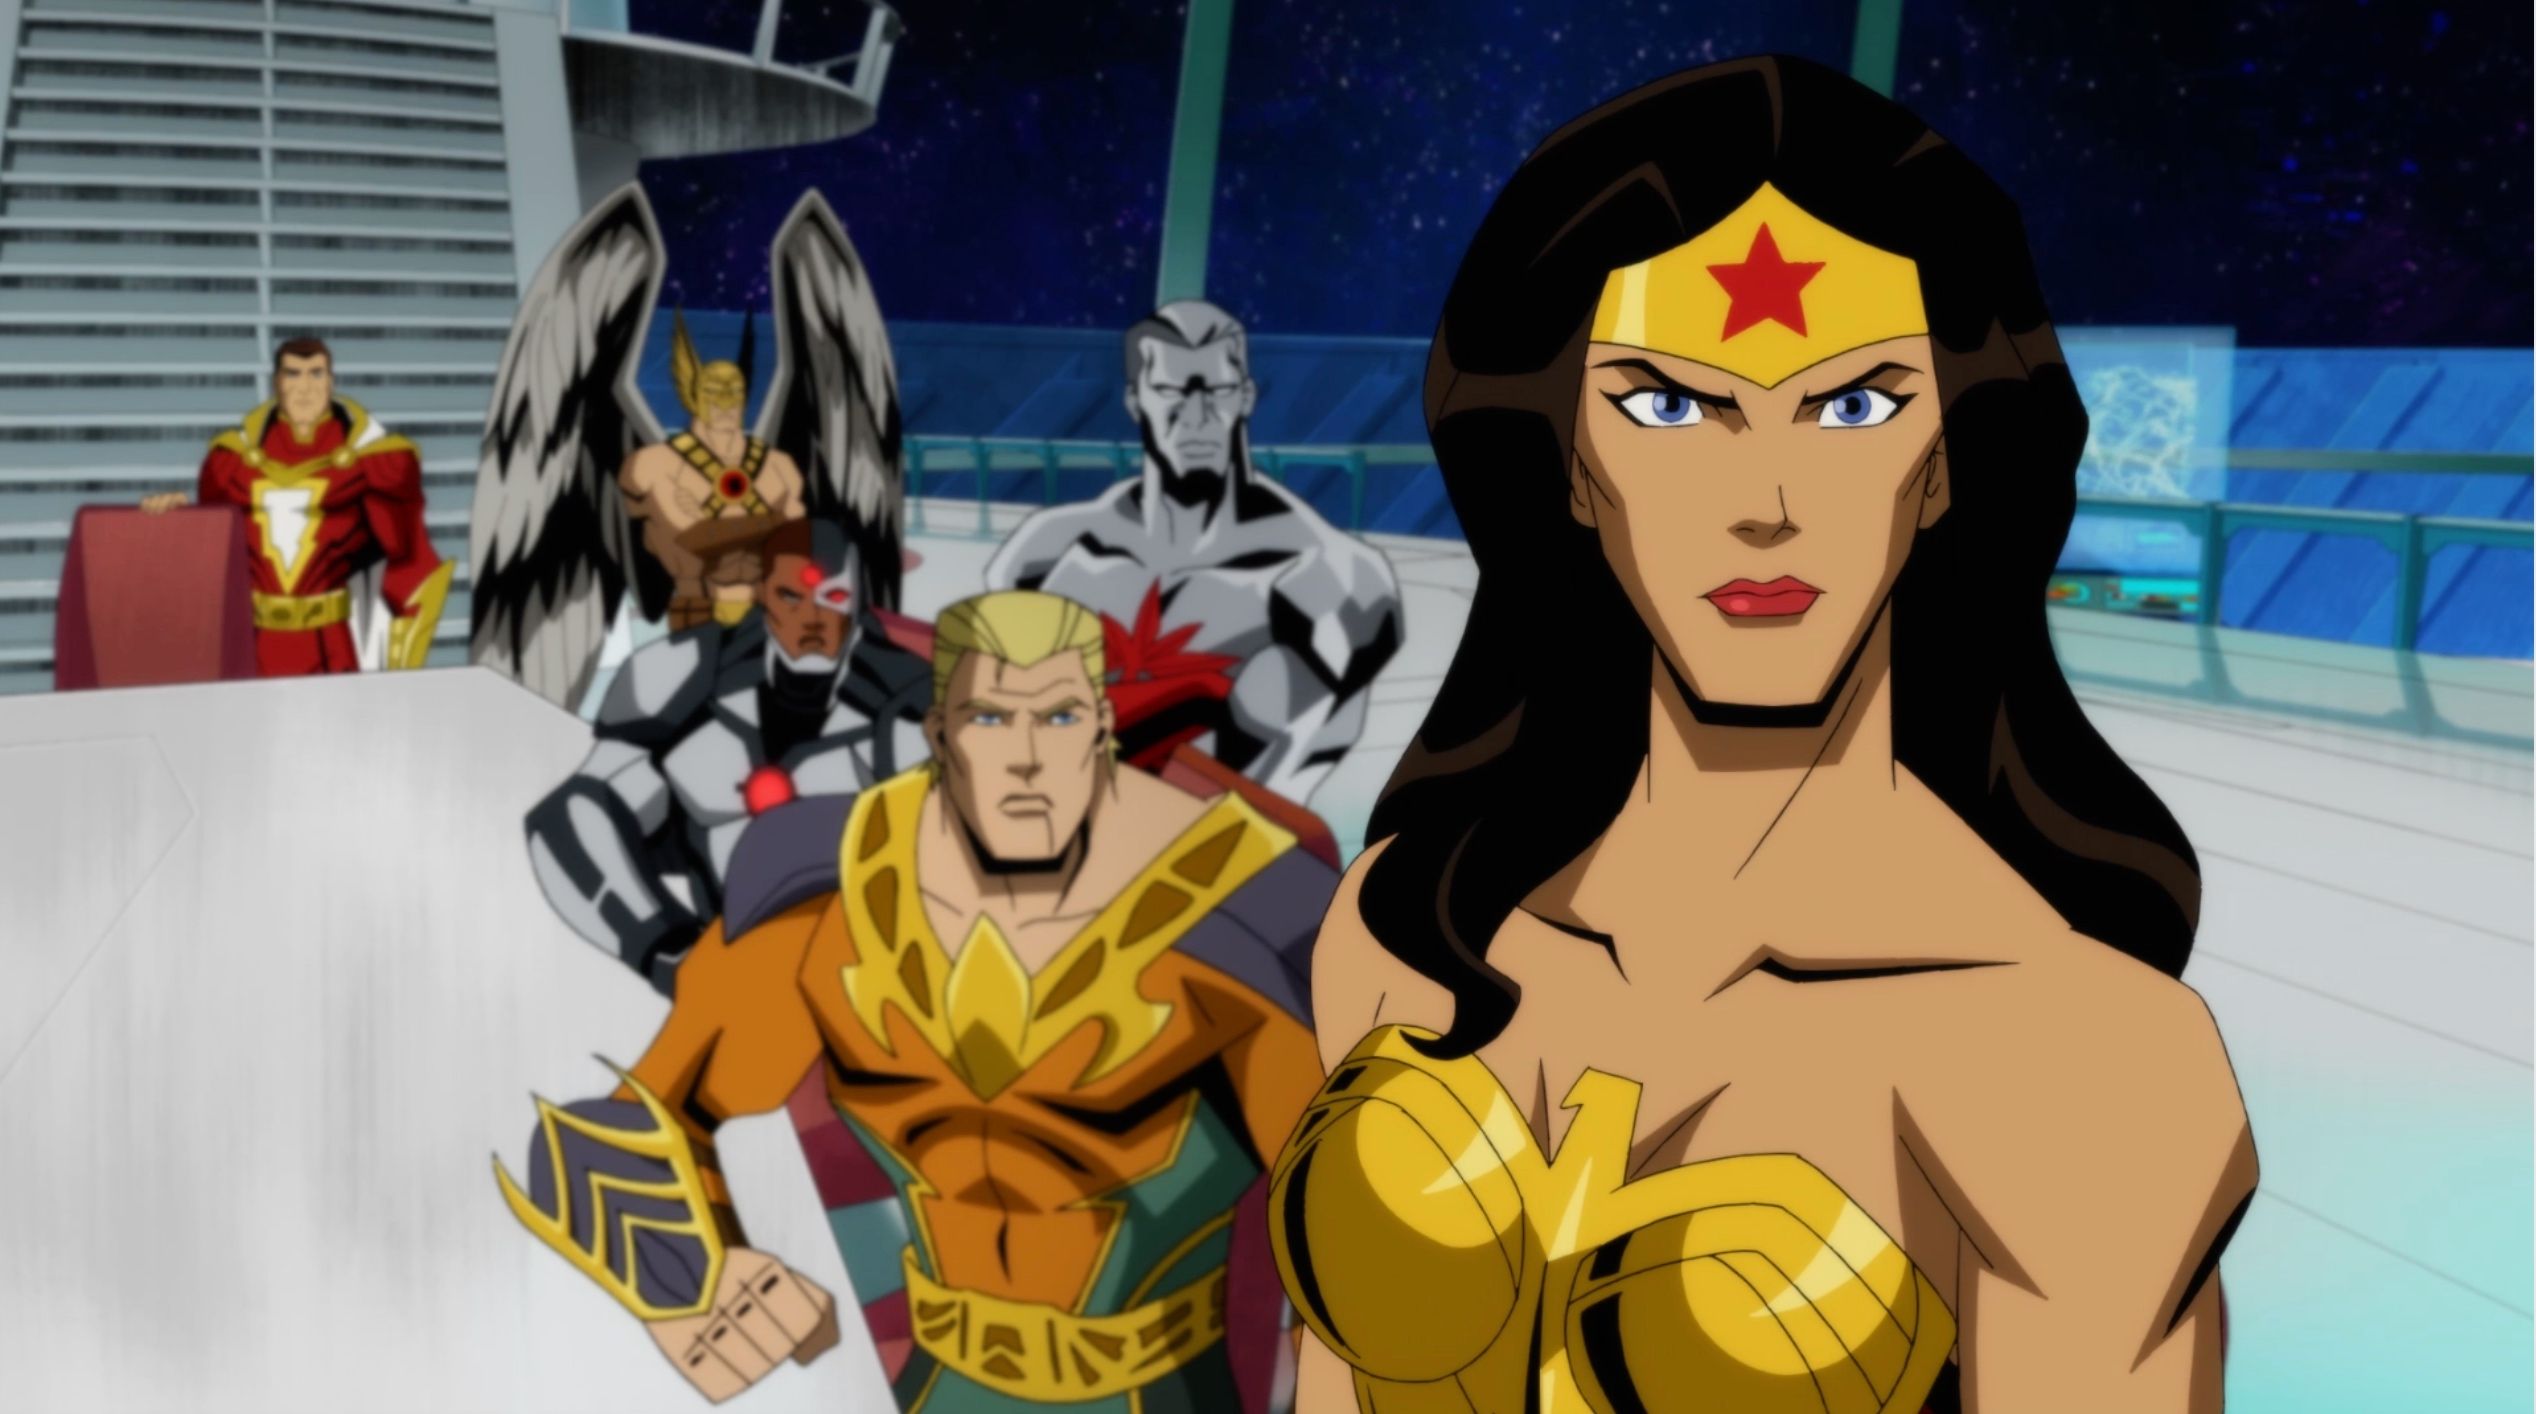 Wonder Woman and Justice League in Injustice